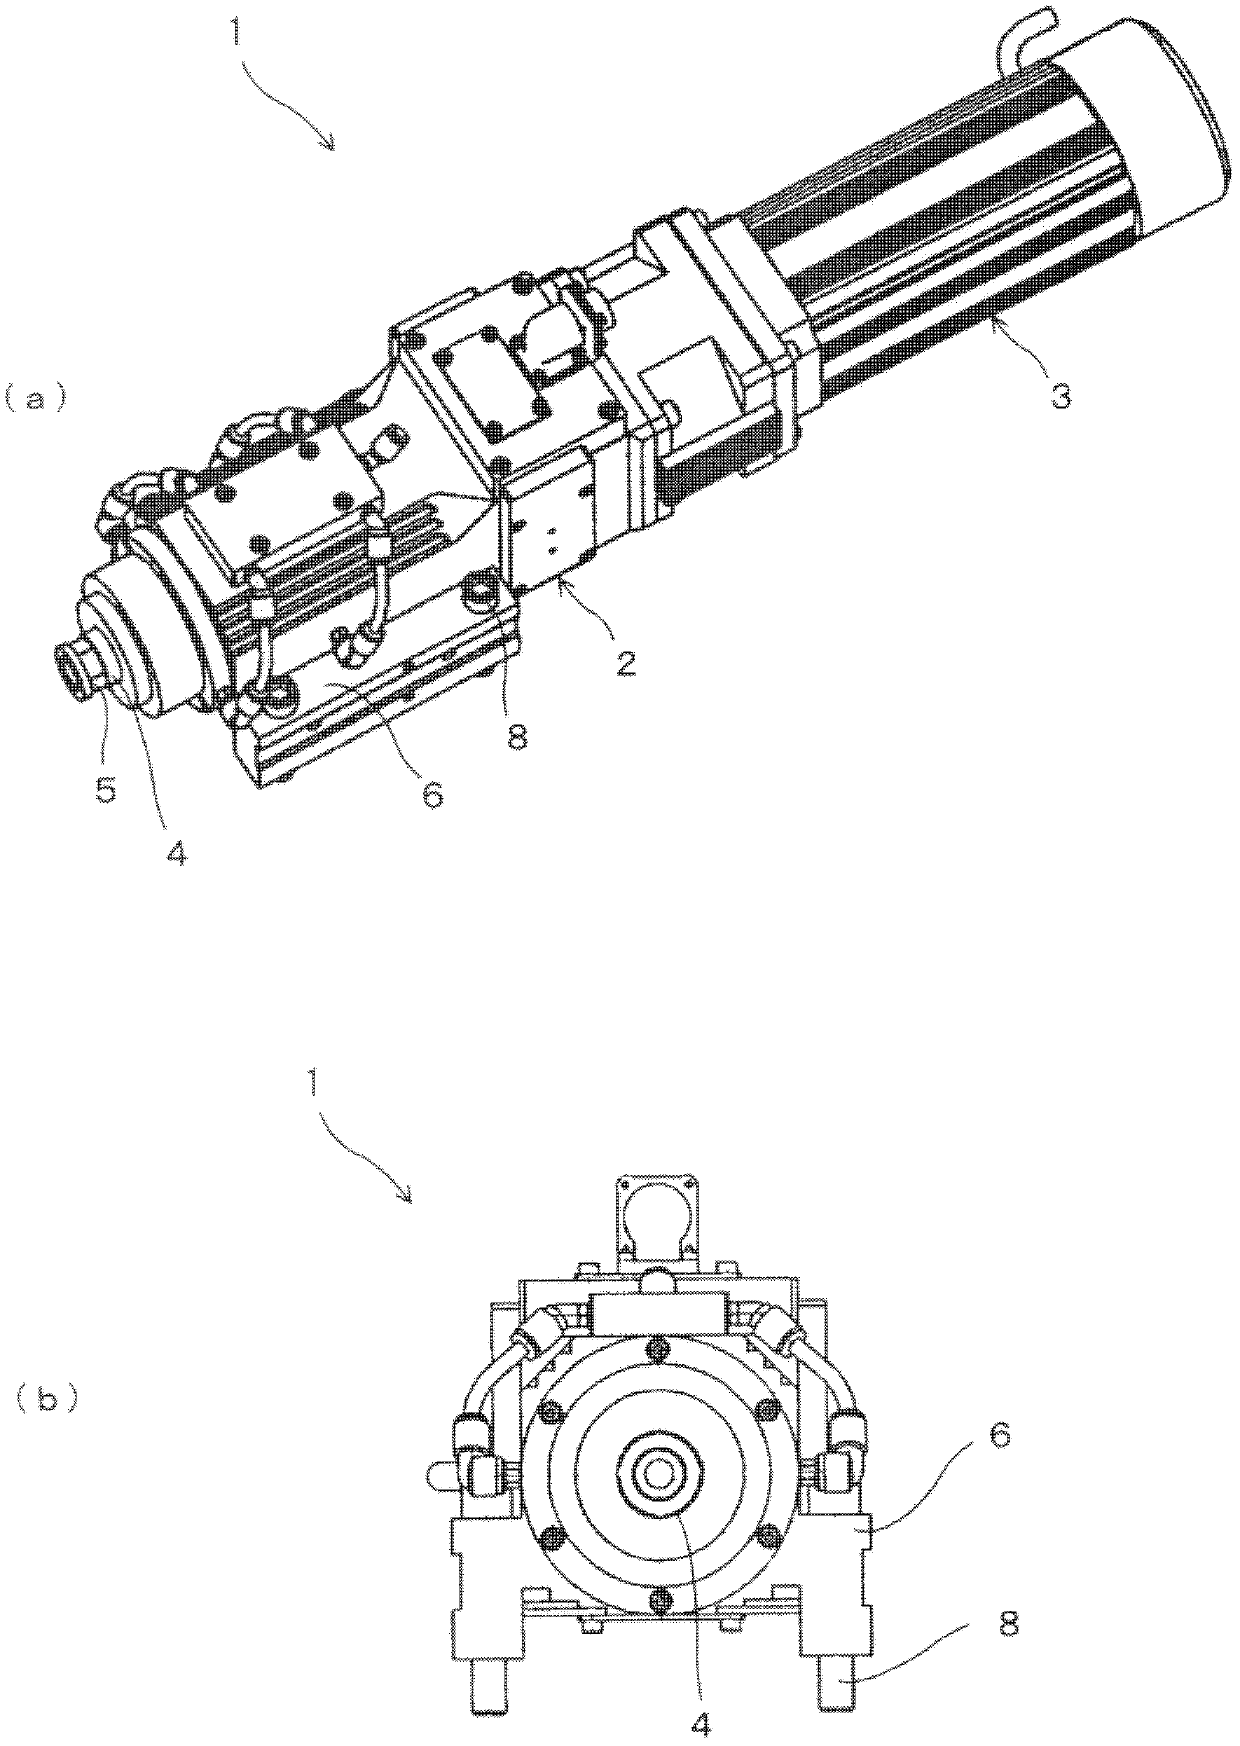 Cutter holder and main shaft device